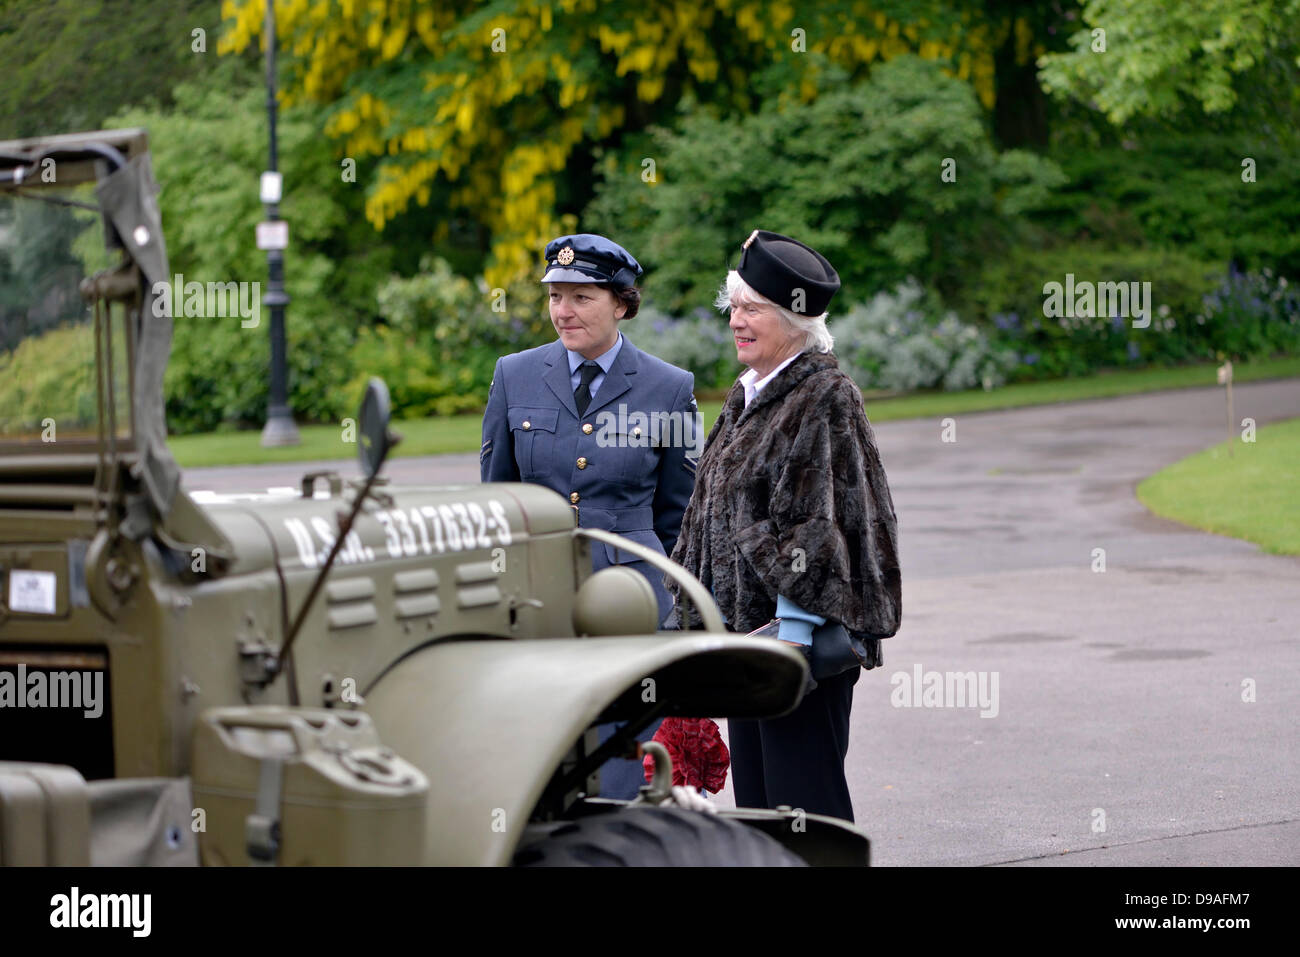 Harrogate, Yorkshire, UK. 16th June, 2013. A woman in a RAF uniform and a woman in 1940's dress admire a USA military vehicle at an event in Valley Gardens to raise money for The Magnesia Well Pump Room Project to create an exhibition on mineral springs. Credit:  John Fryer/Alamy Live News Stock Photo